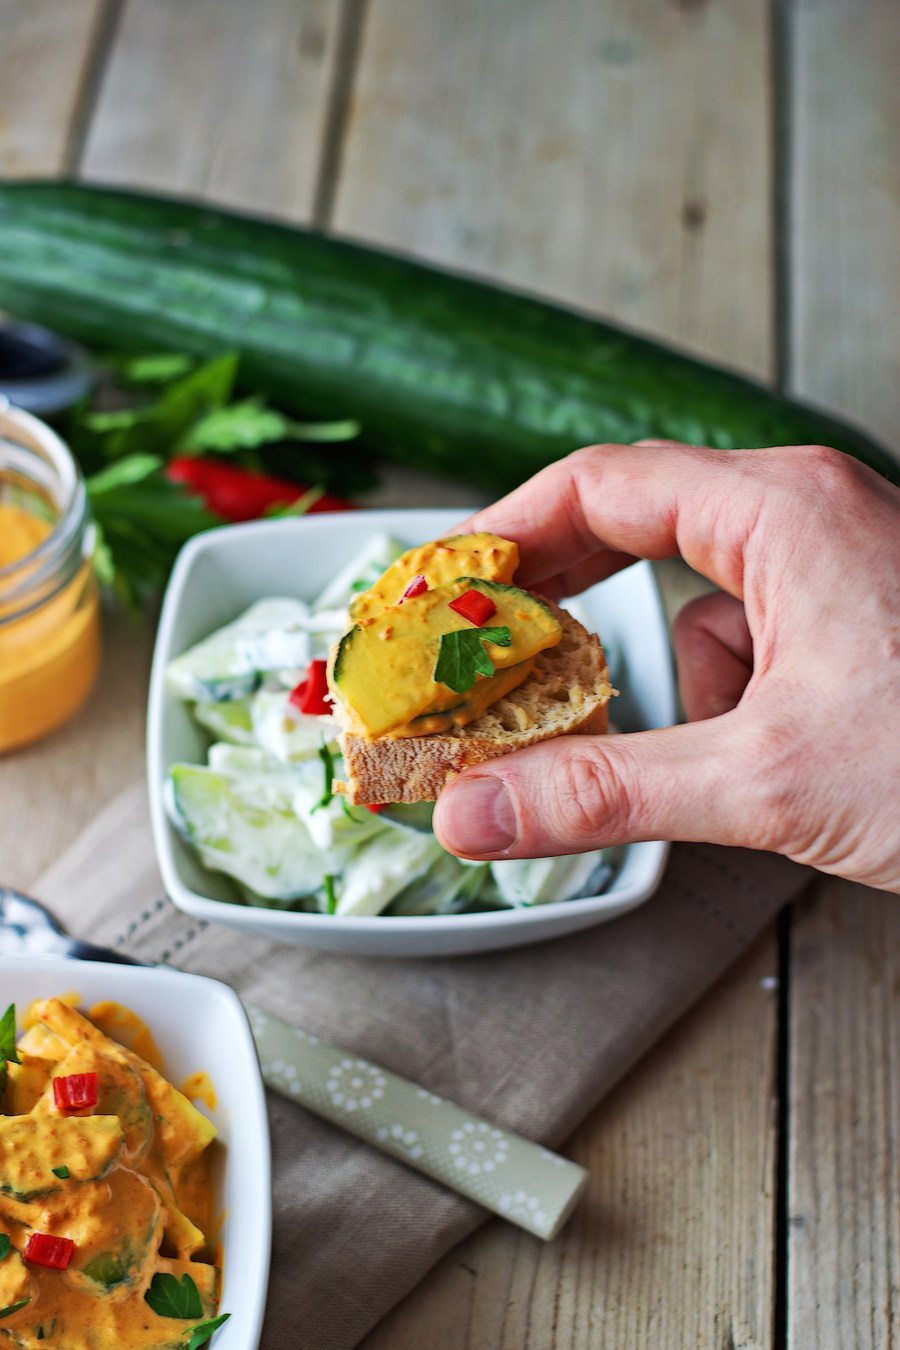 A hand holding a piece of bread with the spicy cucumber salad.